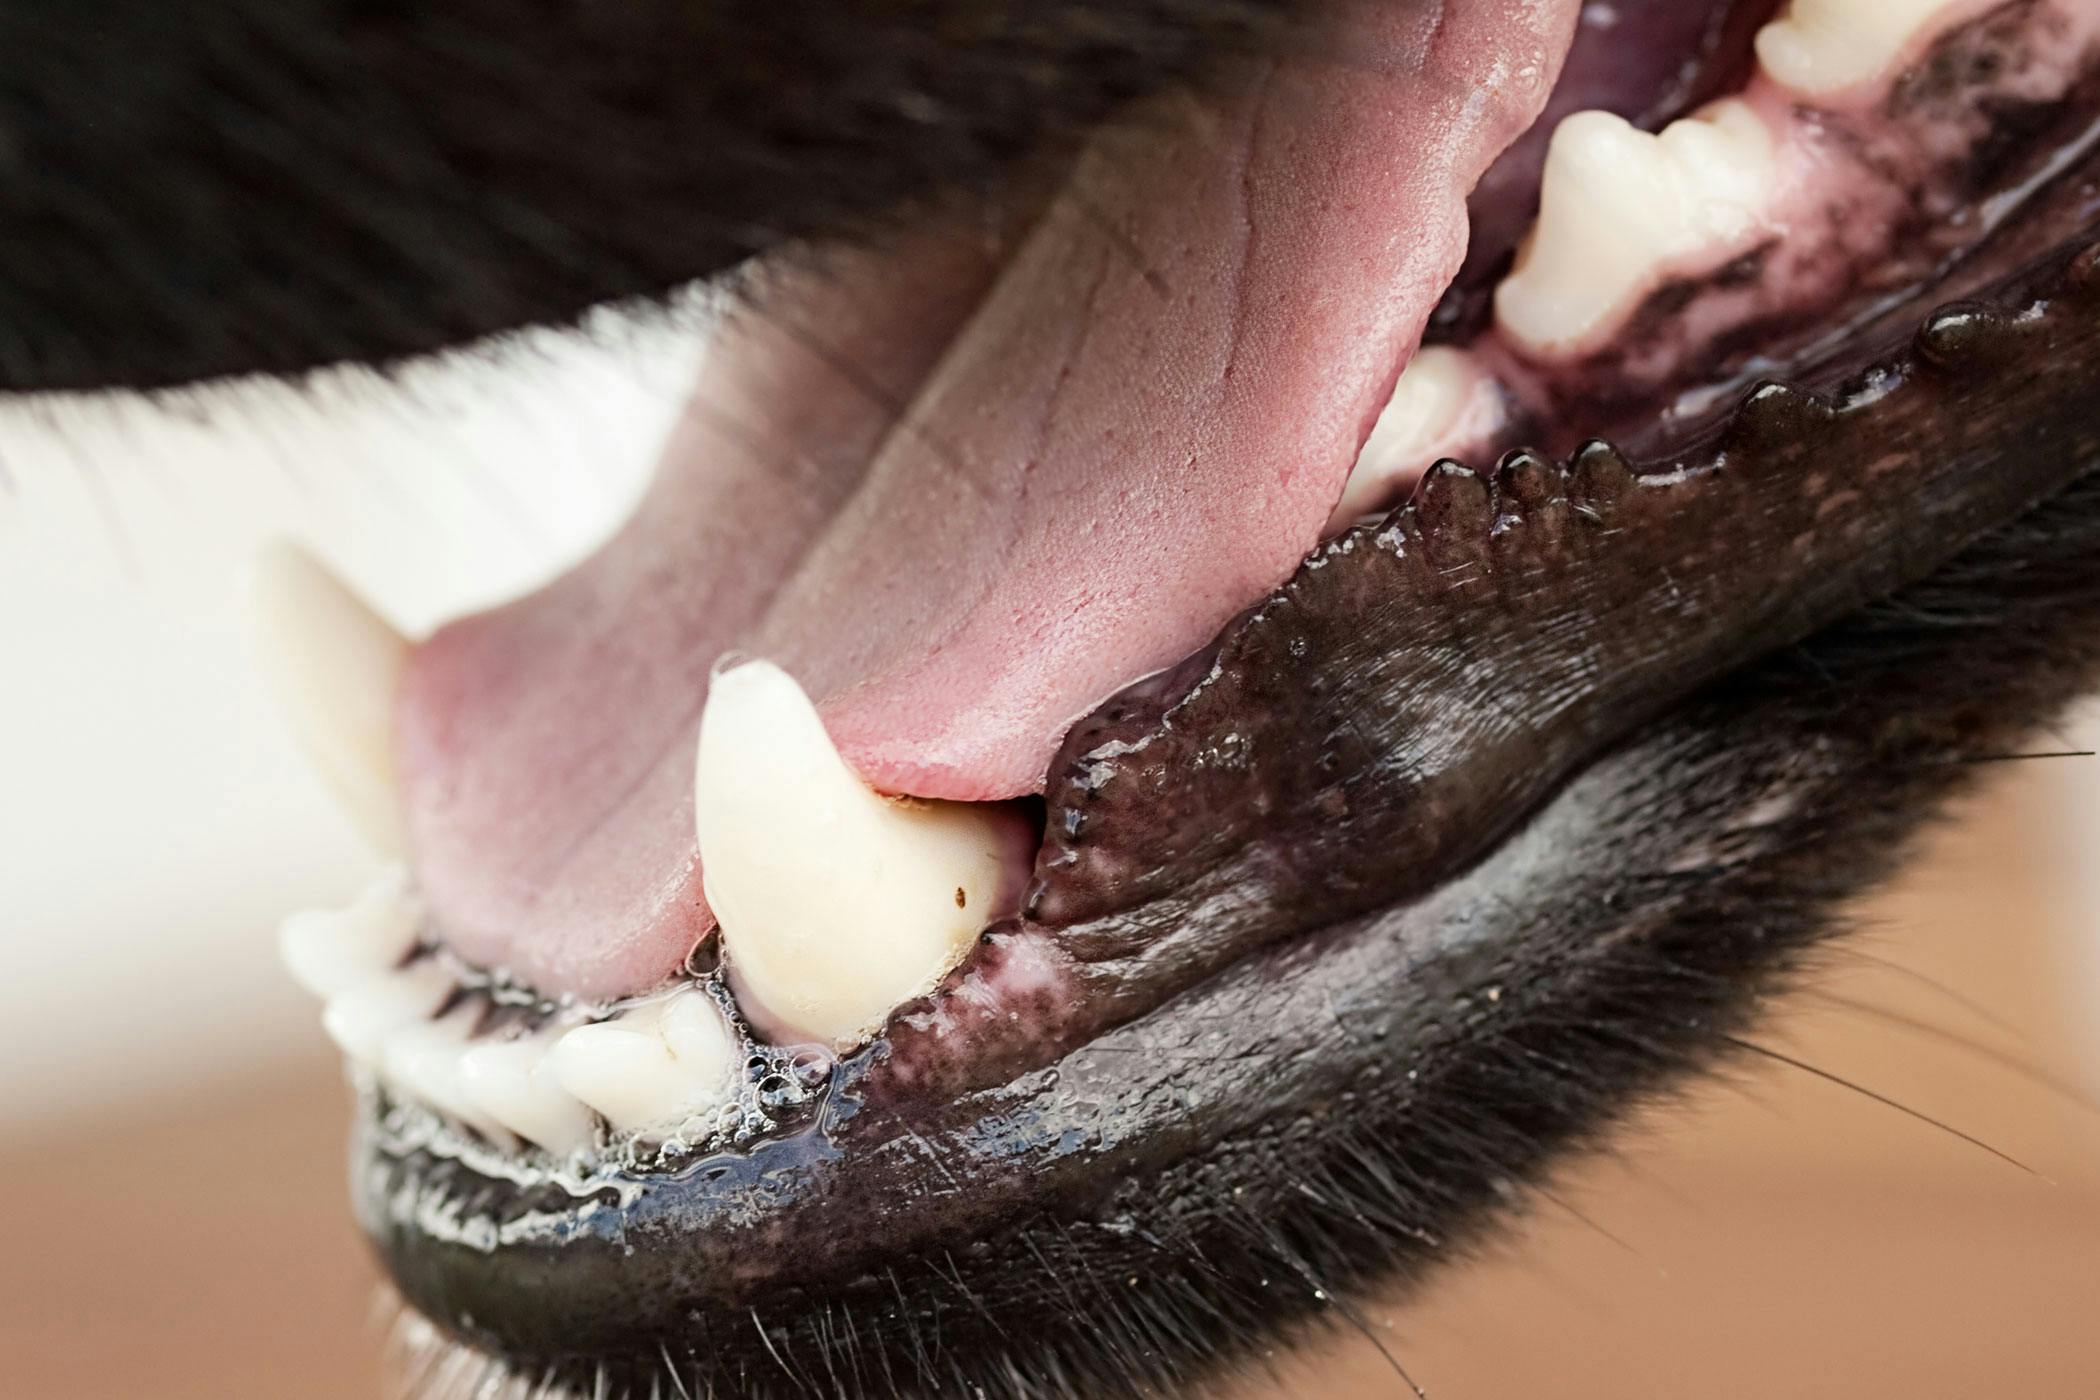 how to help gingivitis in dogs